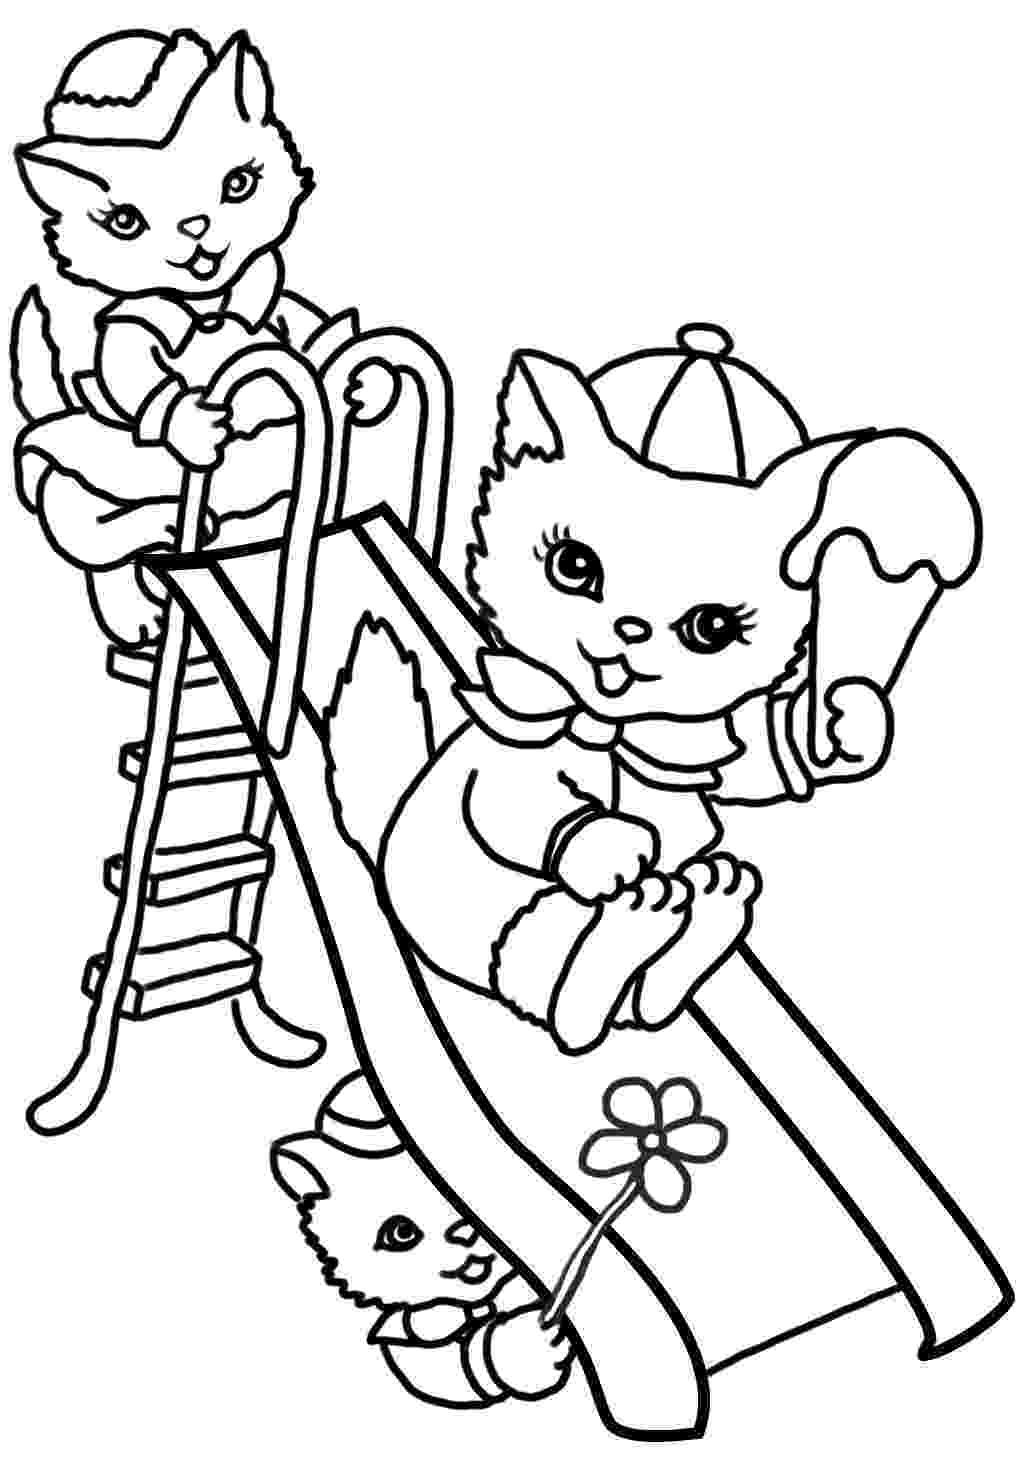 summer coloring pictures summer coloring pages for girls free large images summer coloring pictures 